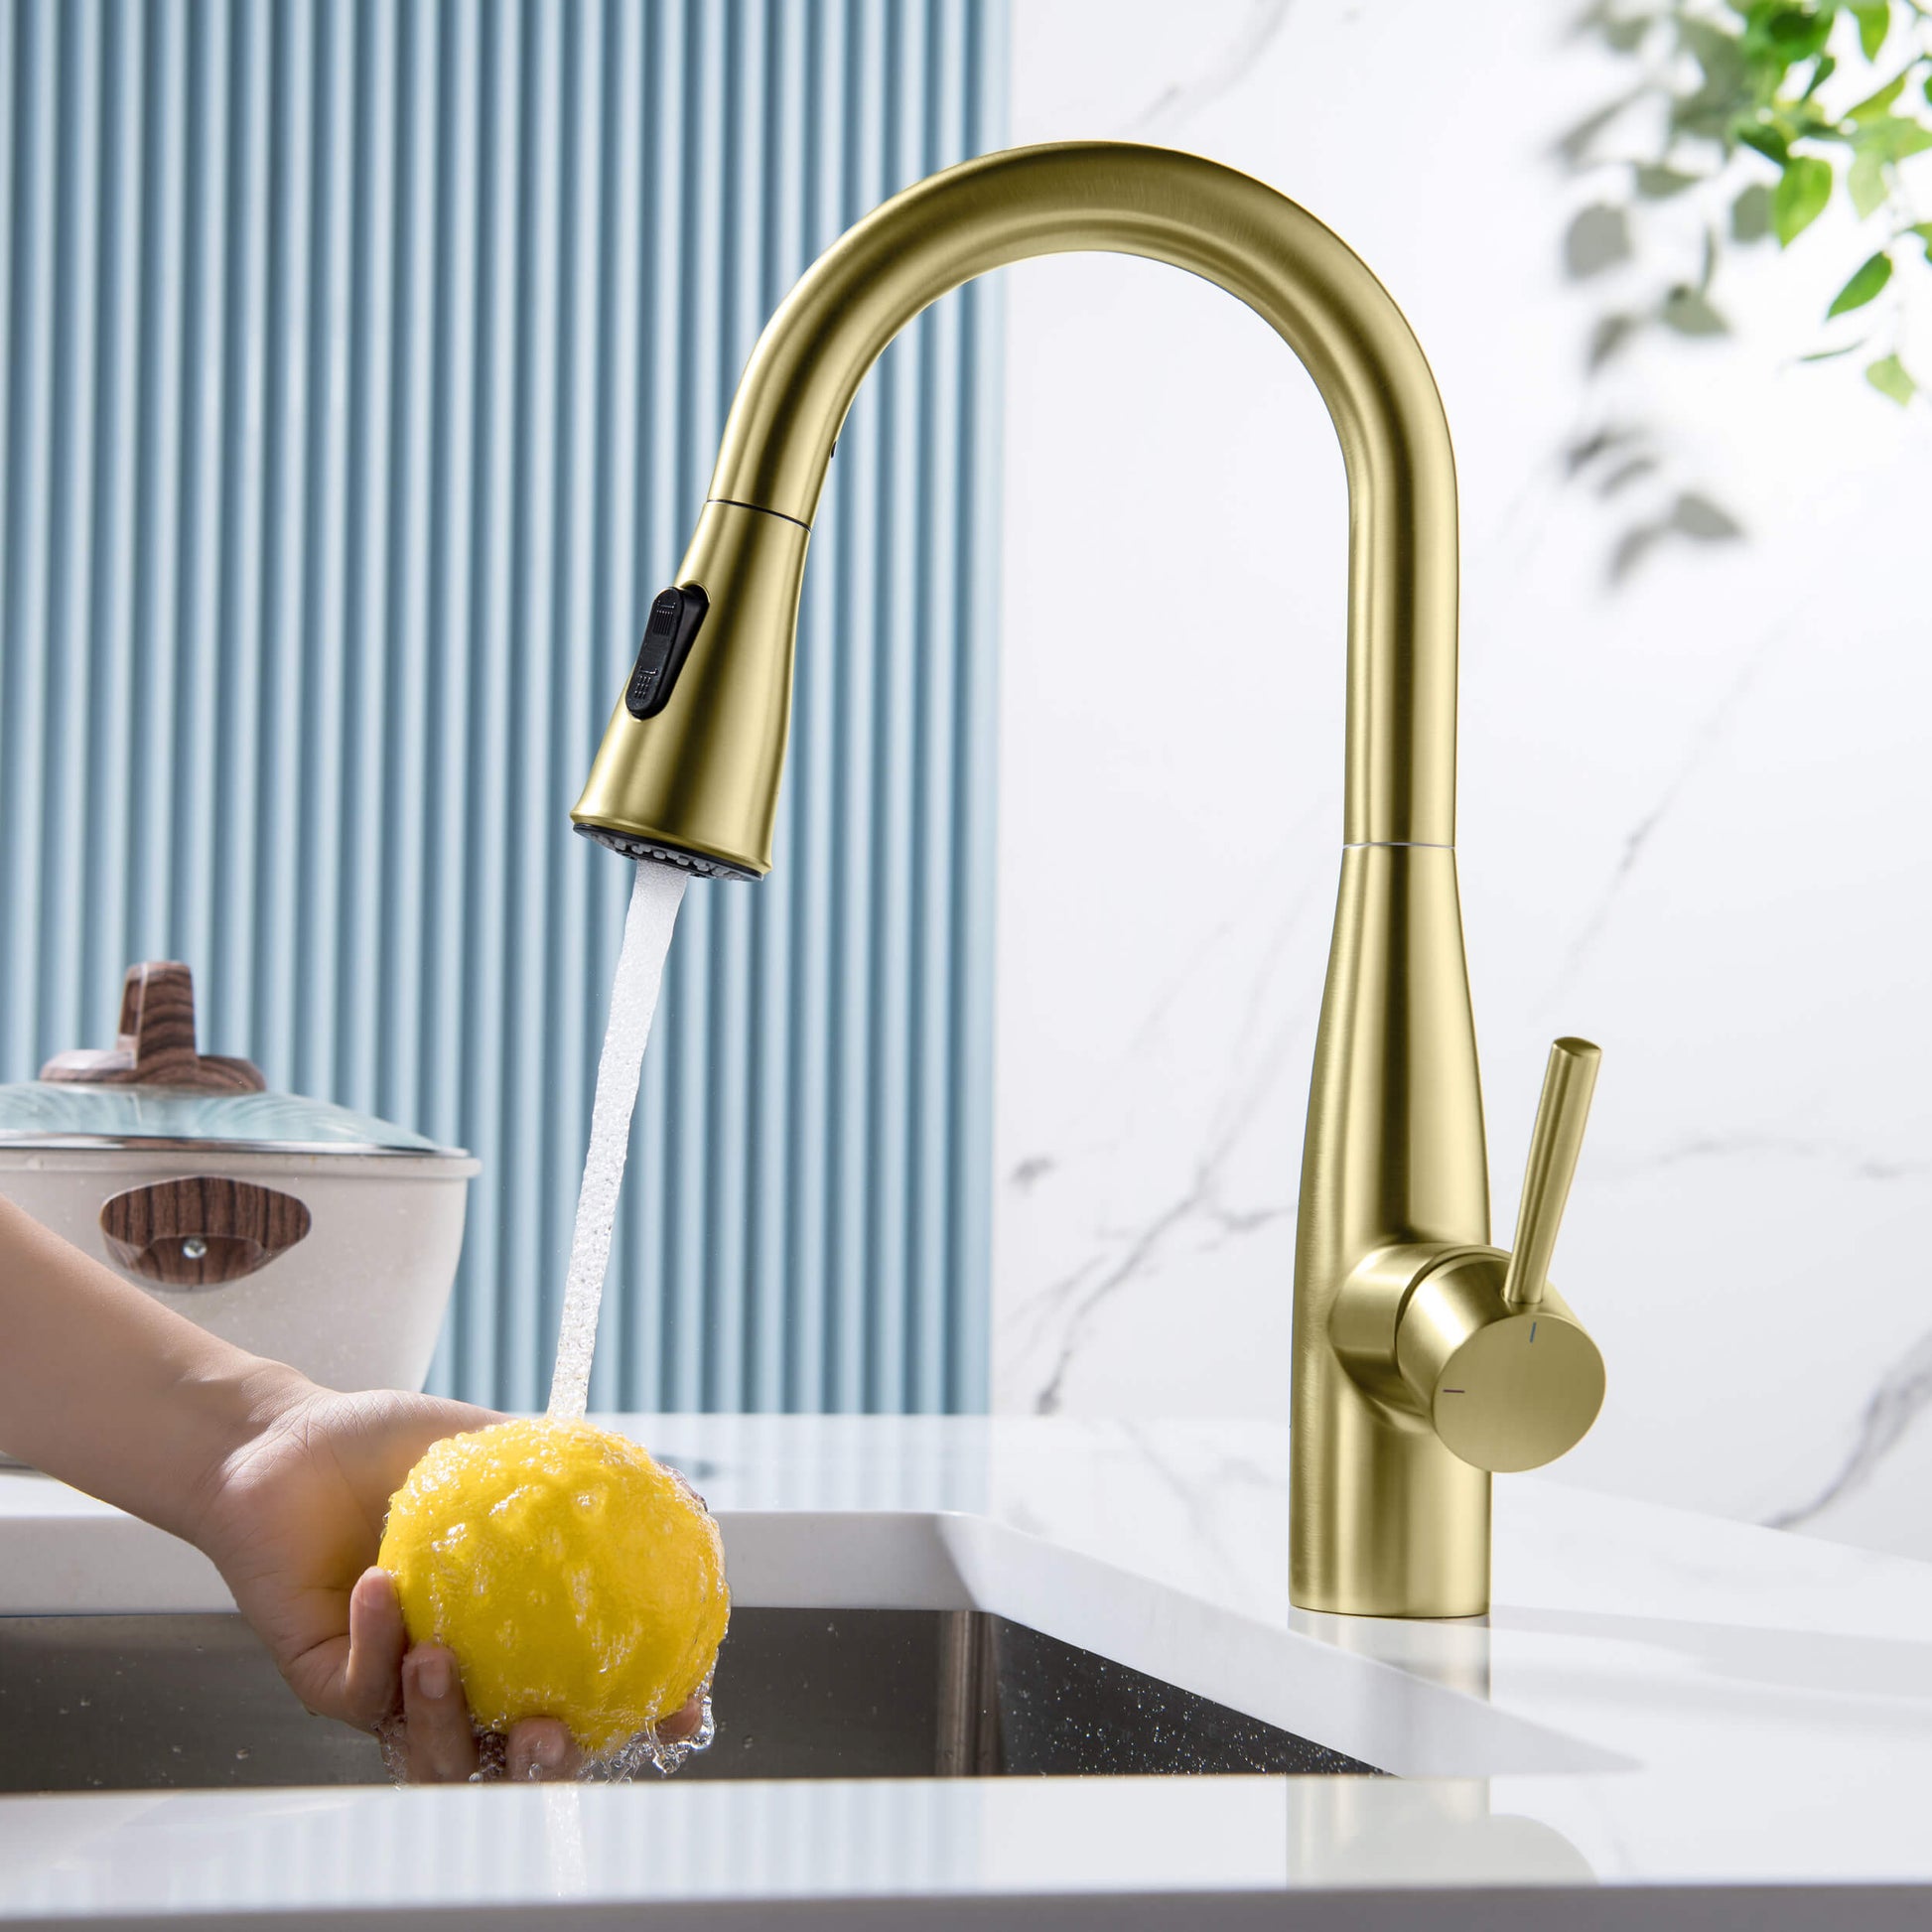 Kibi Bari Single Handle Pull Down Kitchen and Bar Sink Faucet With Soap Dispenser in Brushed Gold Finish